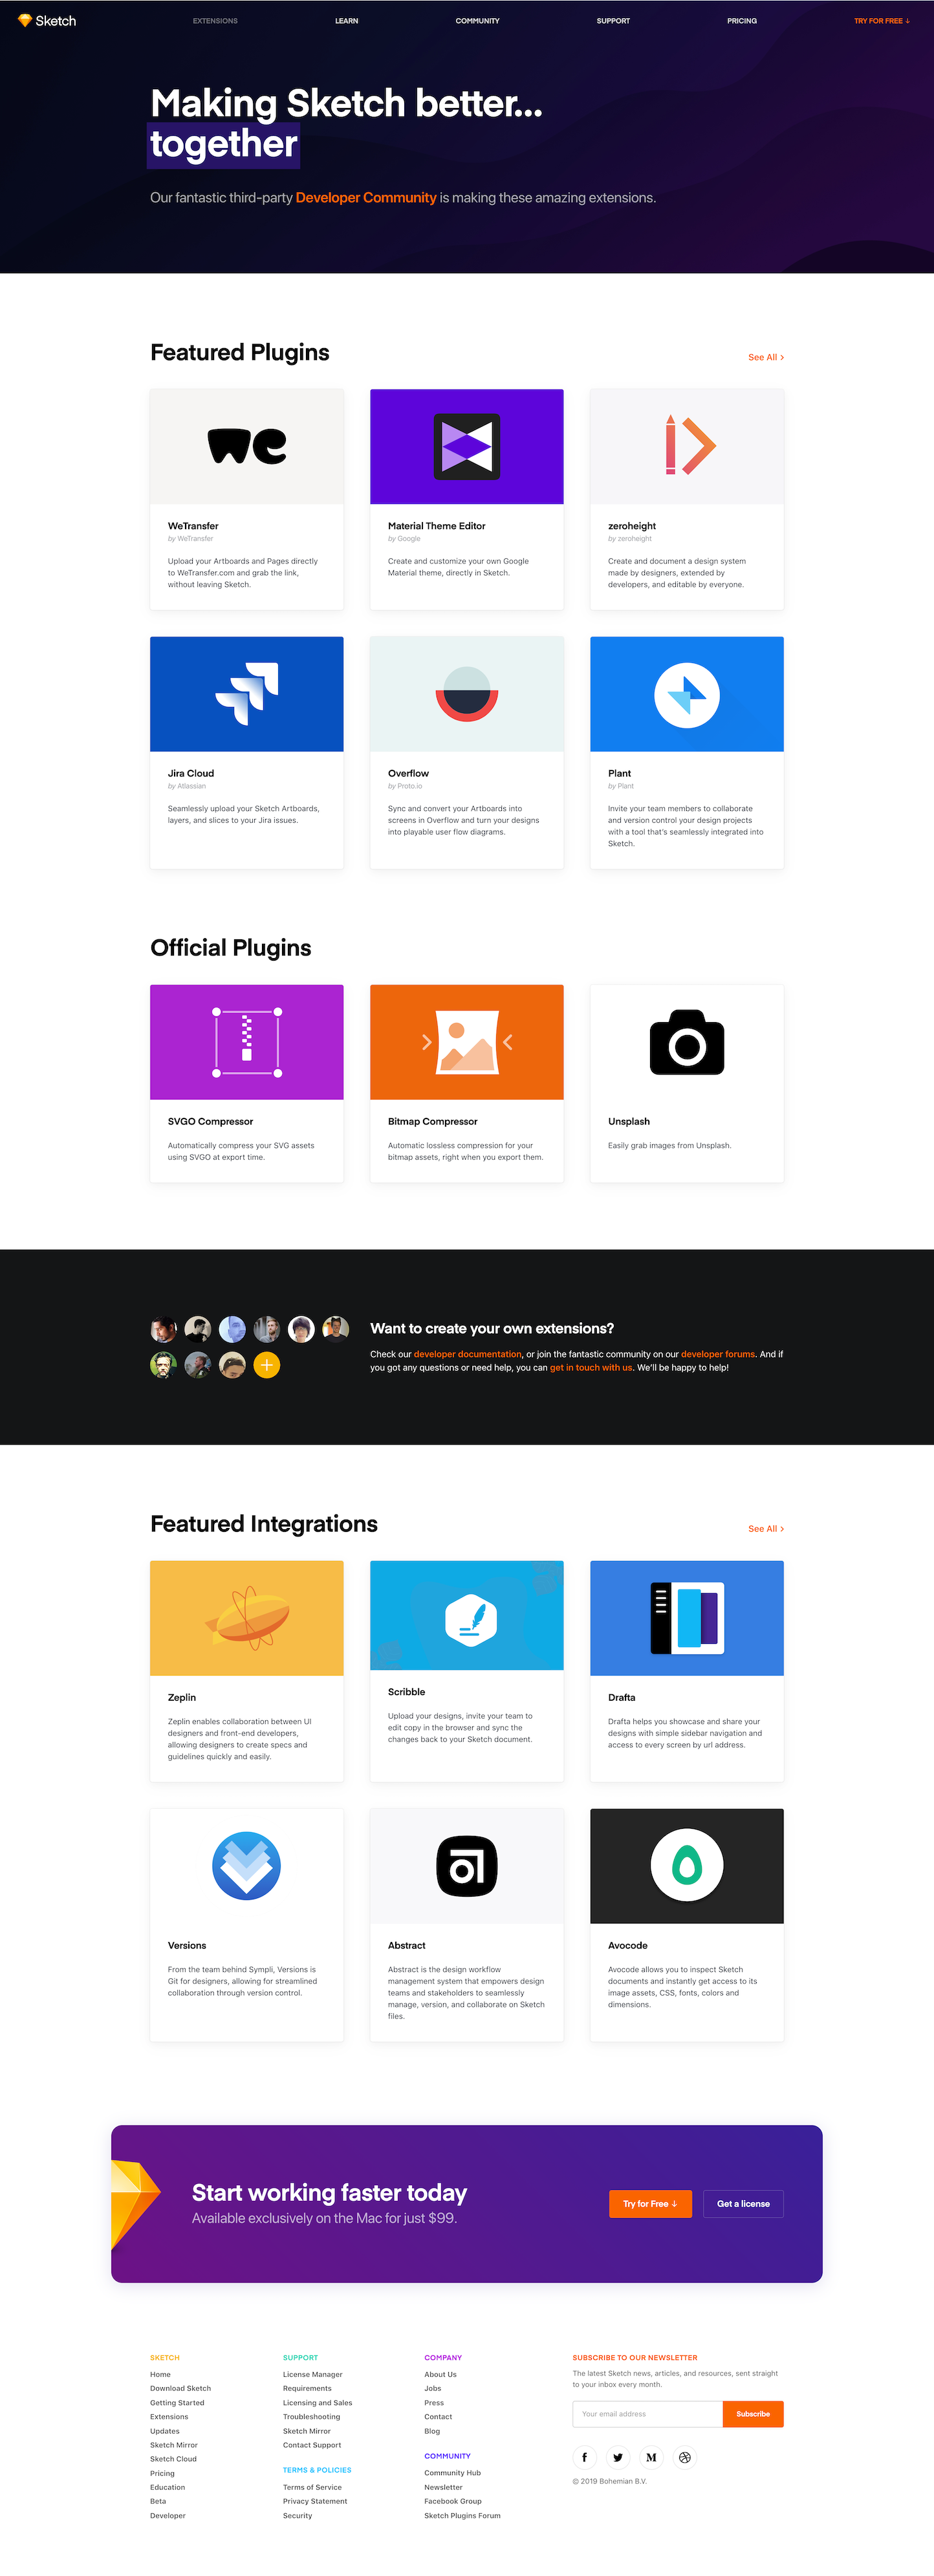 Screenshot of the Extensions page from the Sketch website.